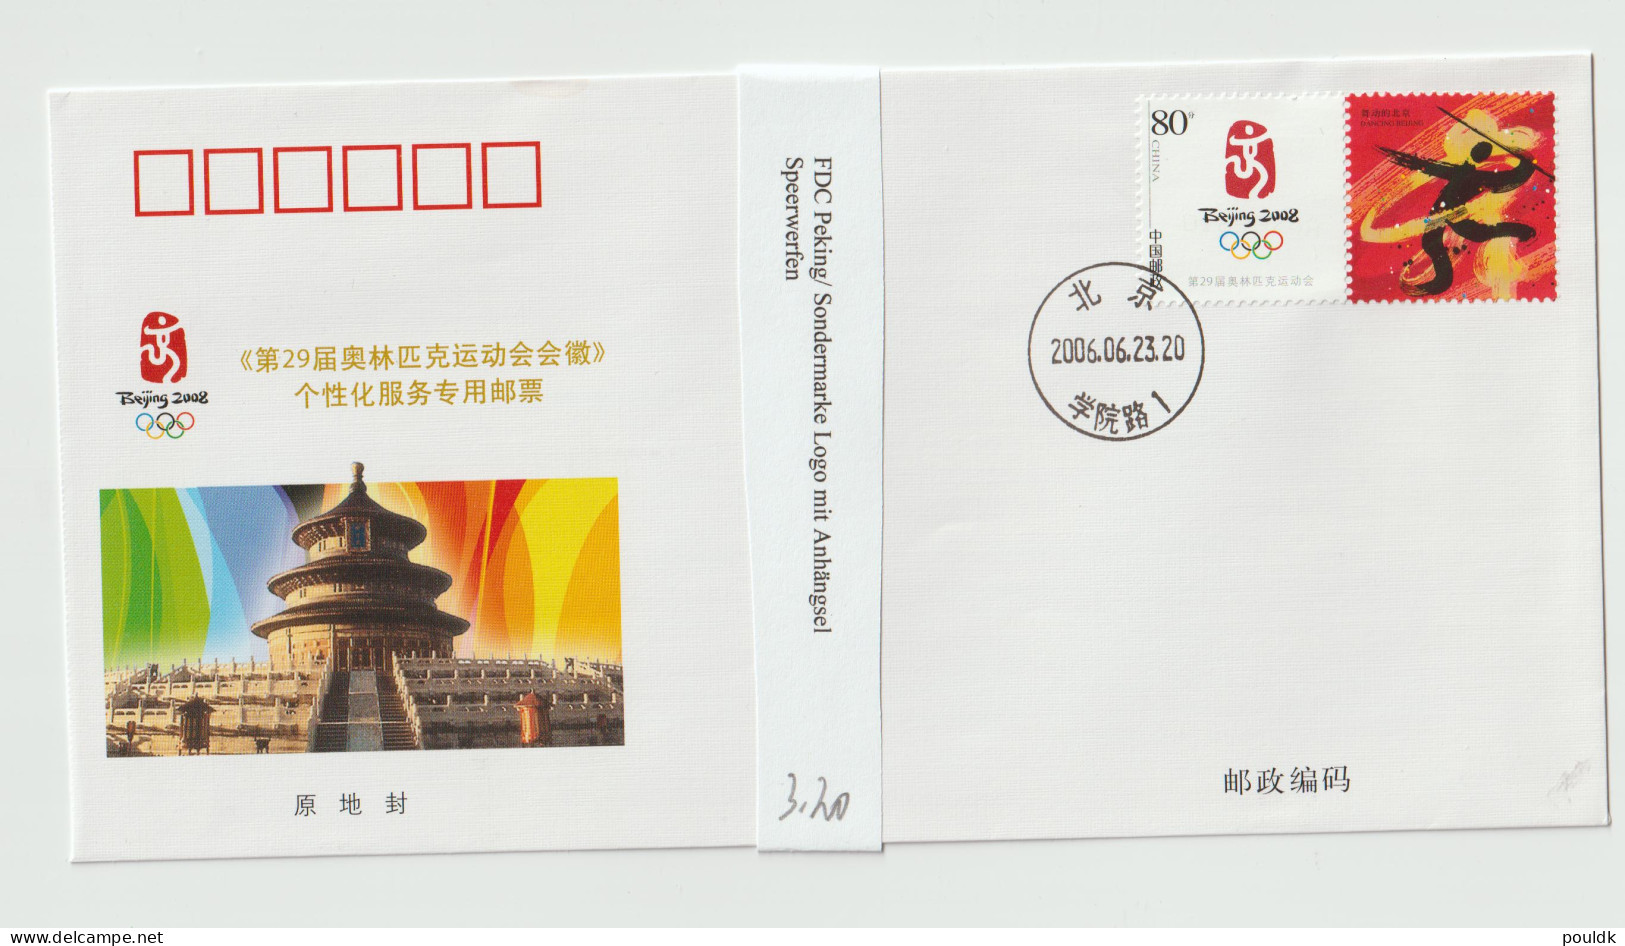 Olympic Games In Beijing 2008 - Cover Commerating Personalized Stamp Of The Emblem To The Games. Postal - Zomer 2008: Peking